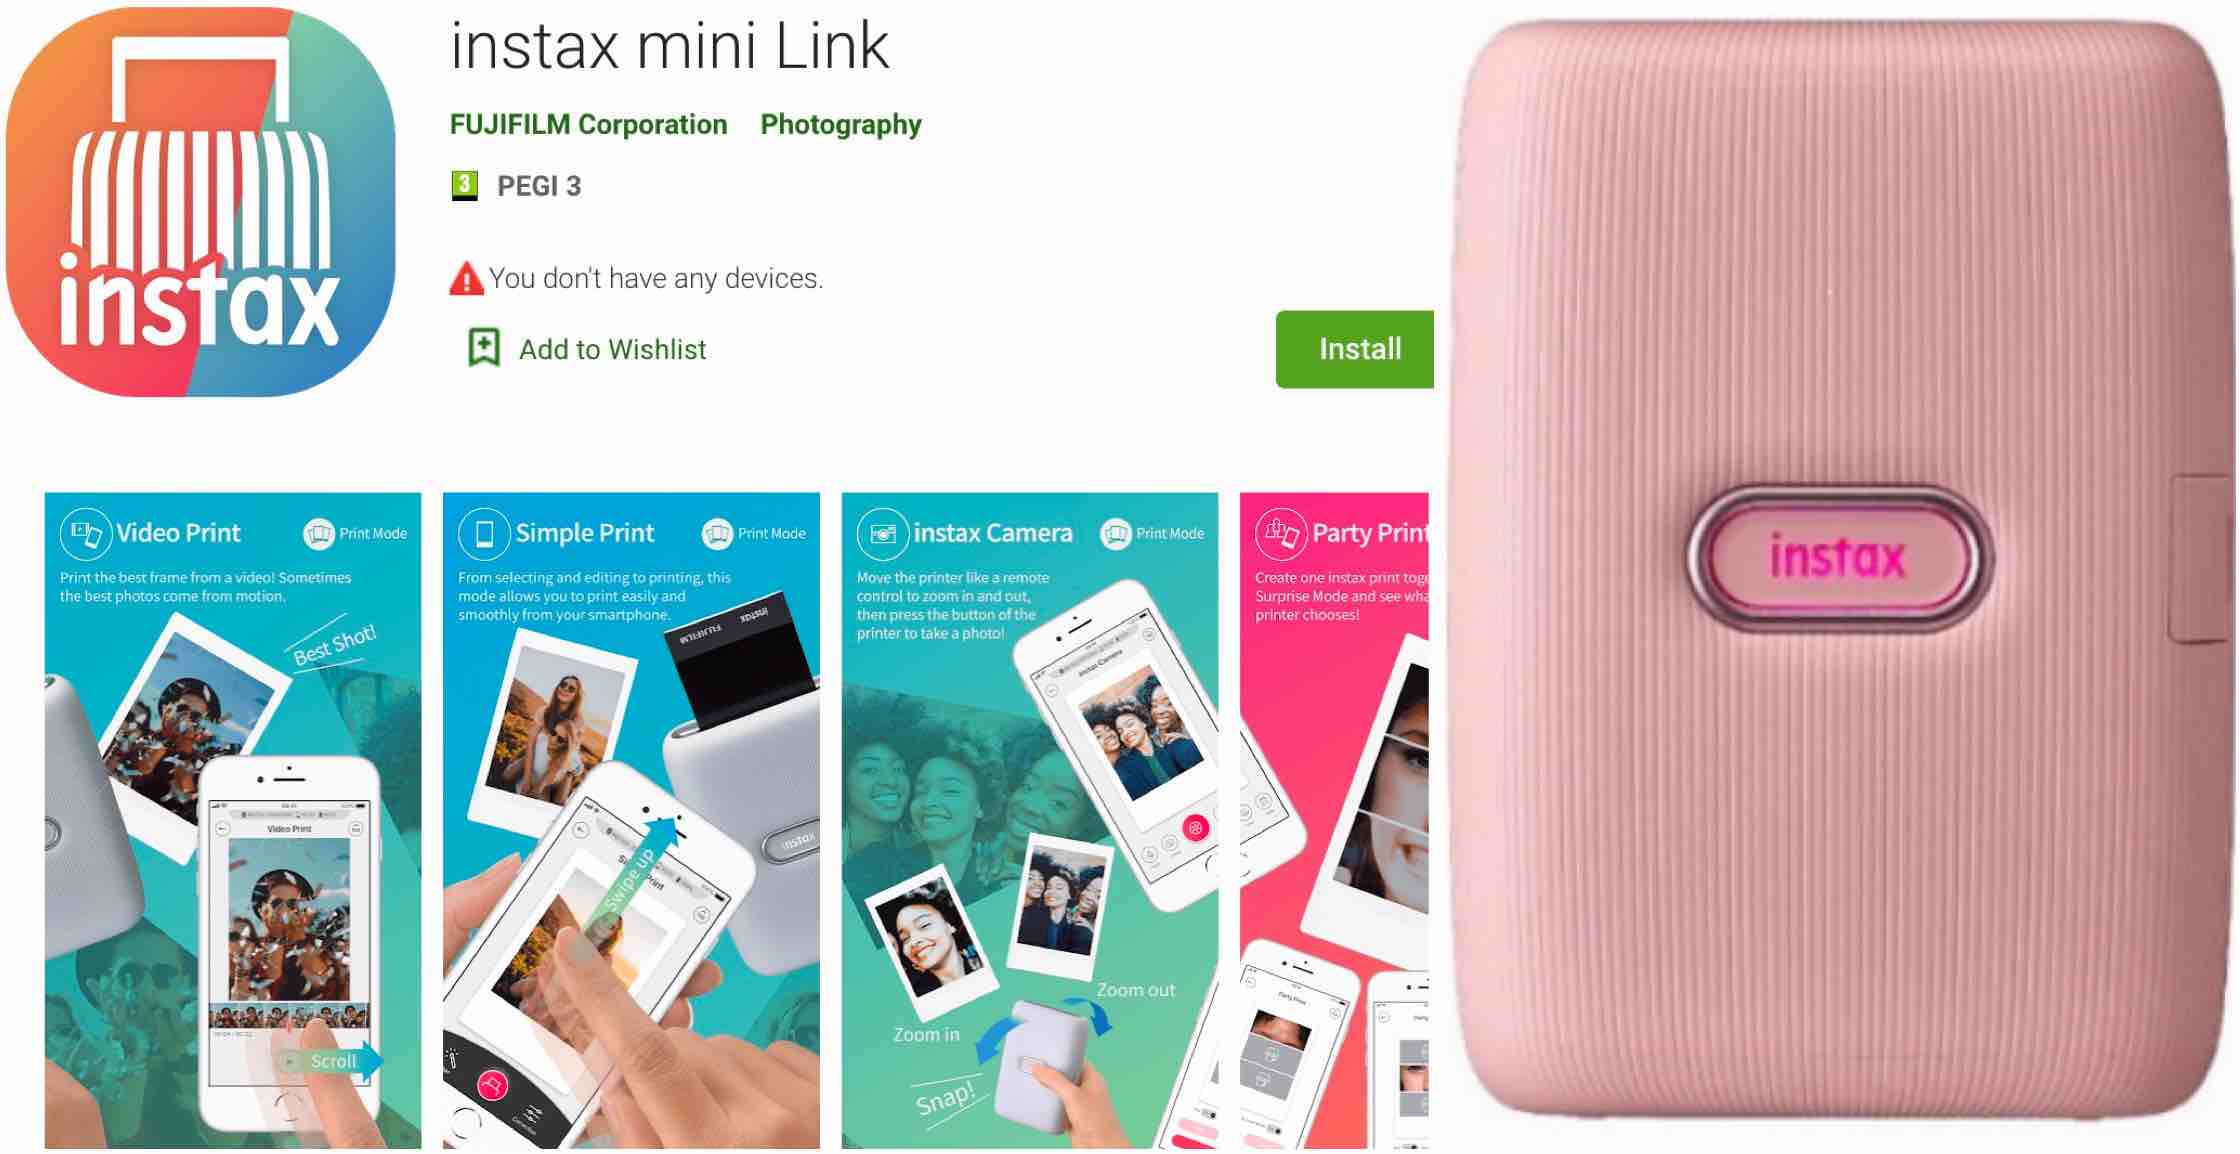 Fujifilm launches new app for “instax mini Link”